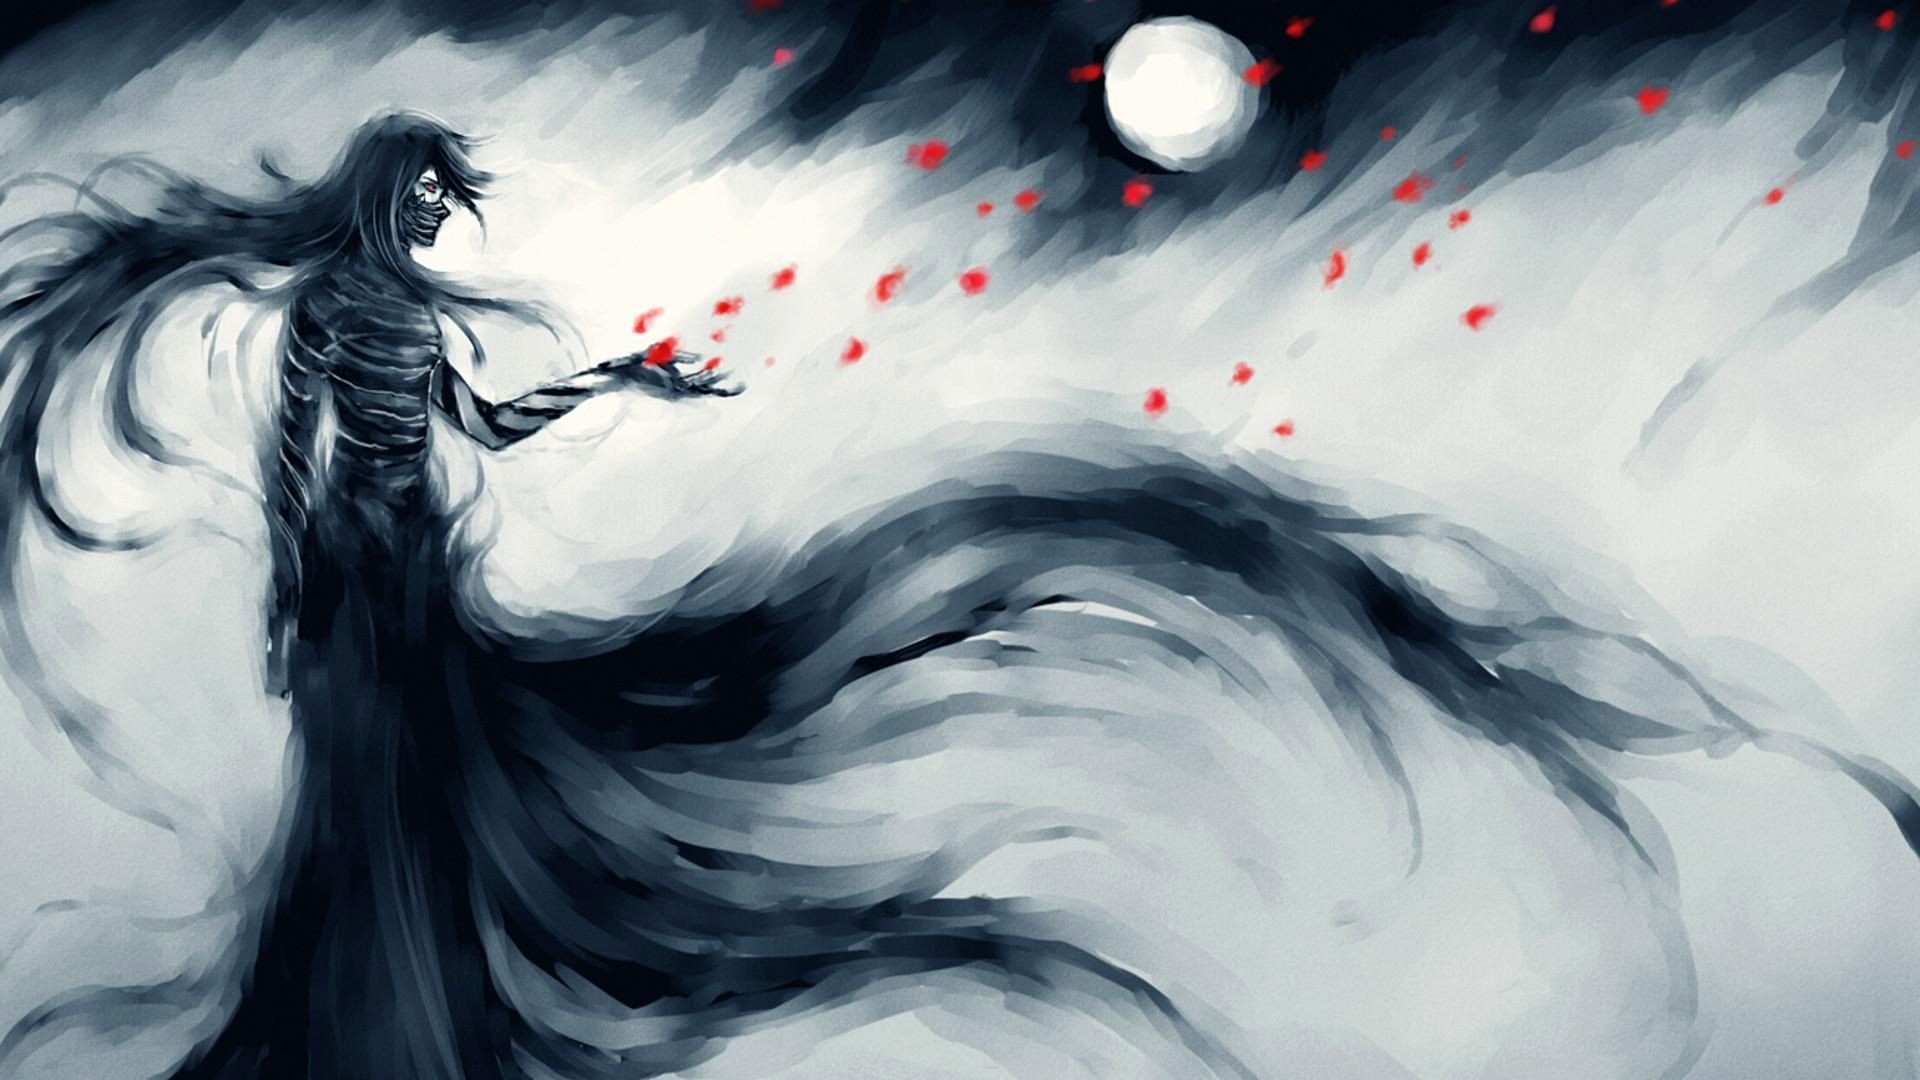 Horror Anime Wallpaper Unique Anime Horror Wallpaper This Year of The Hudson